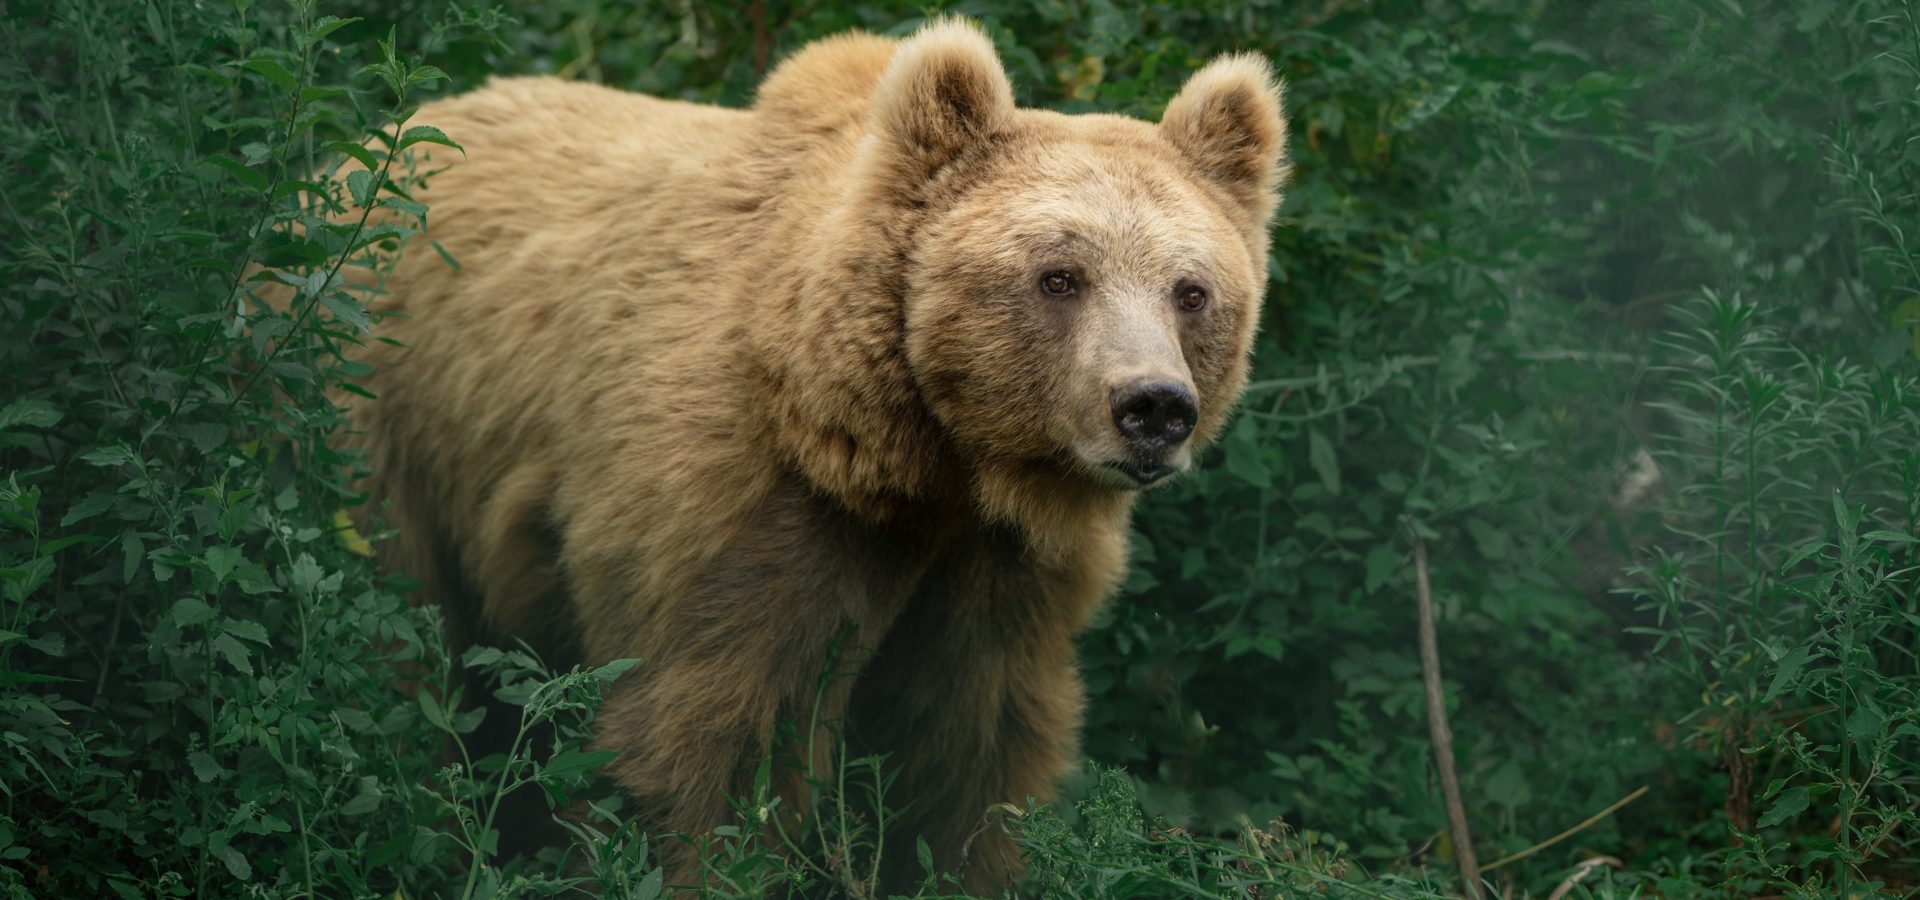 Brown Bears Of The World: Grizzly Present, Ominous Future? - Wildlife SOS